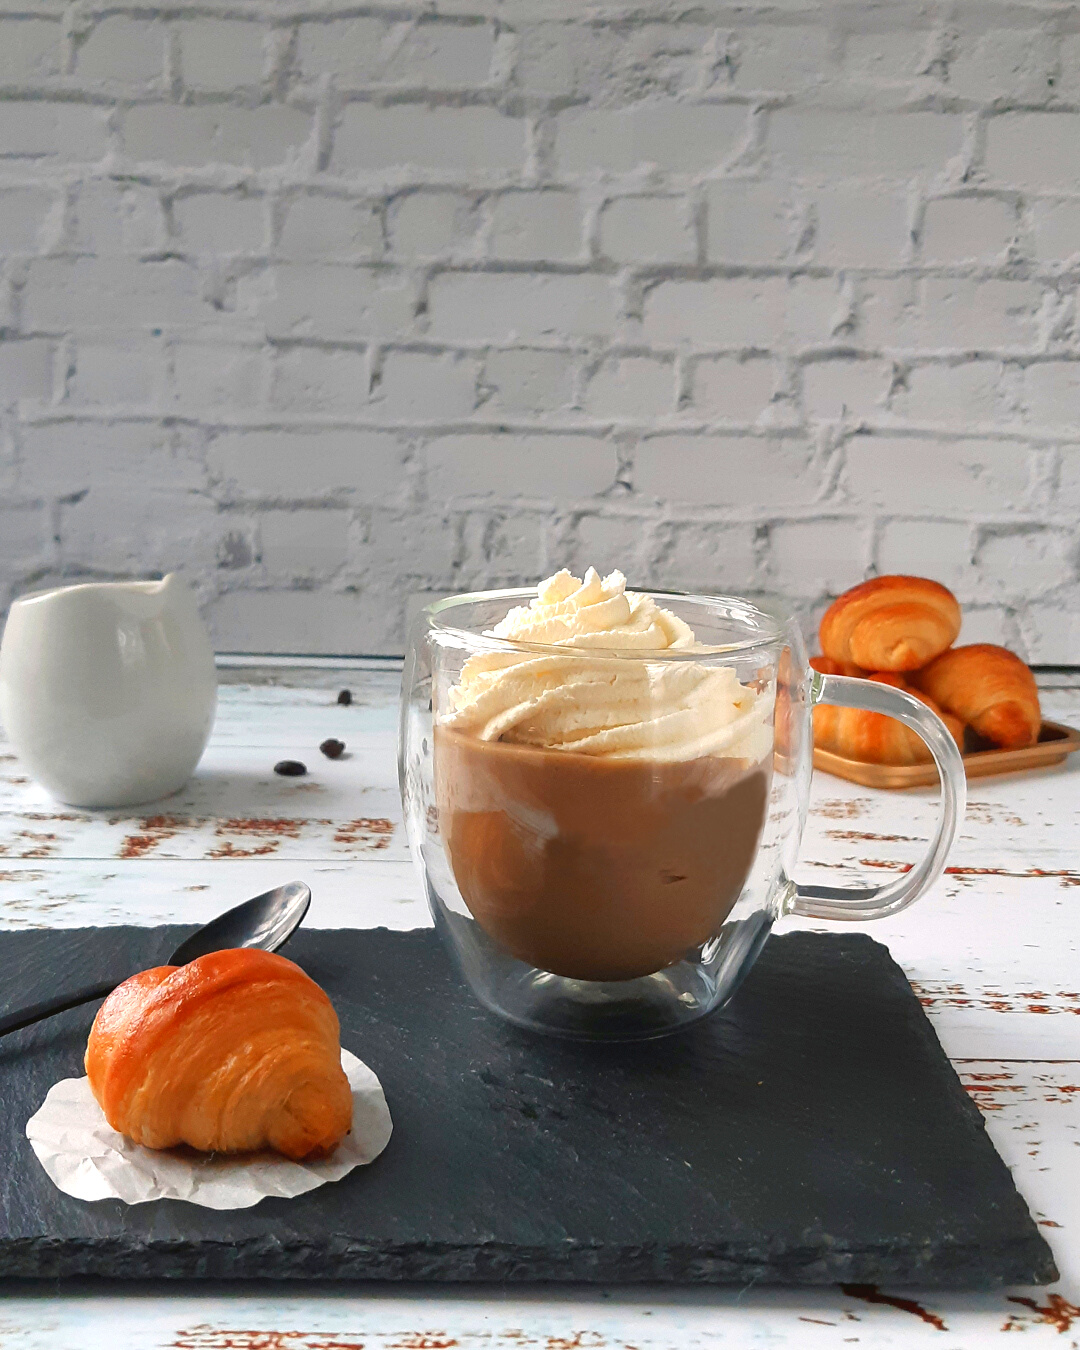 Mini croissant on a slate with a cup of "cappuccino", coffee pastry cream and whipped cream